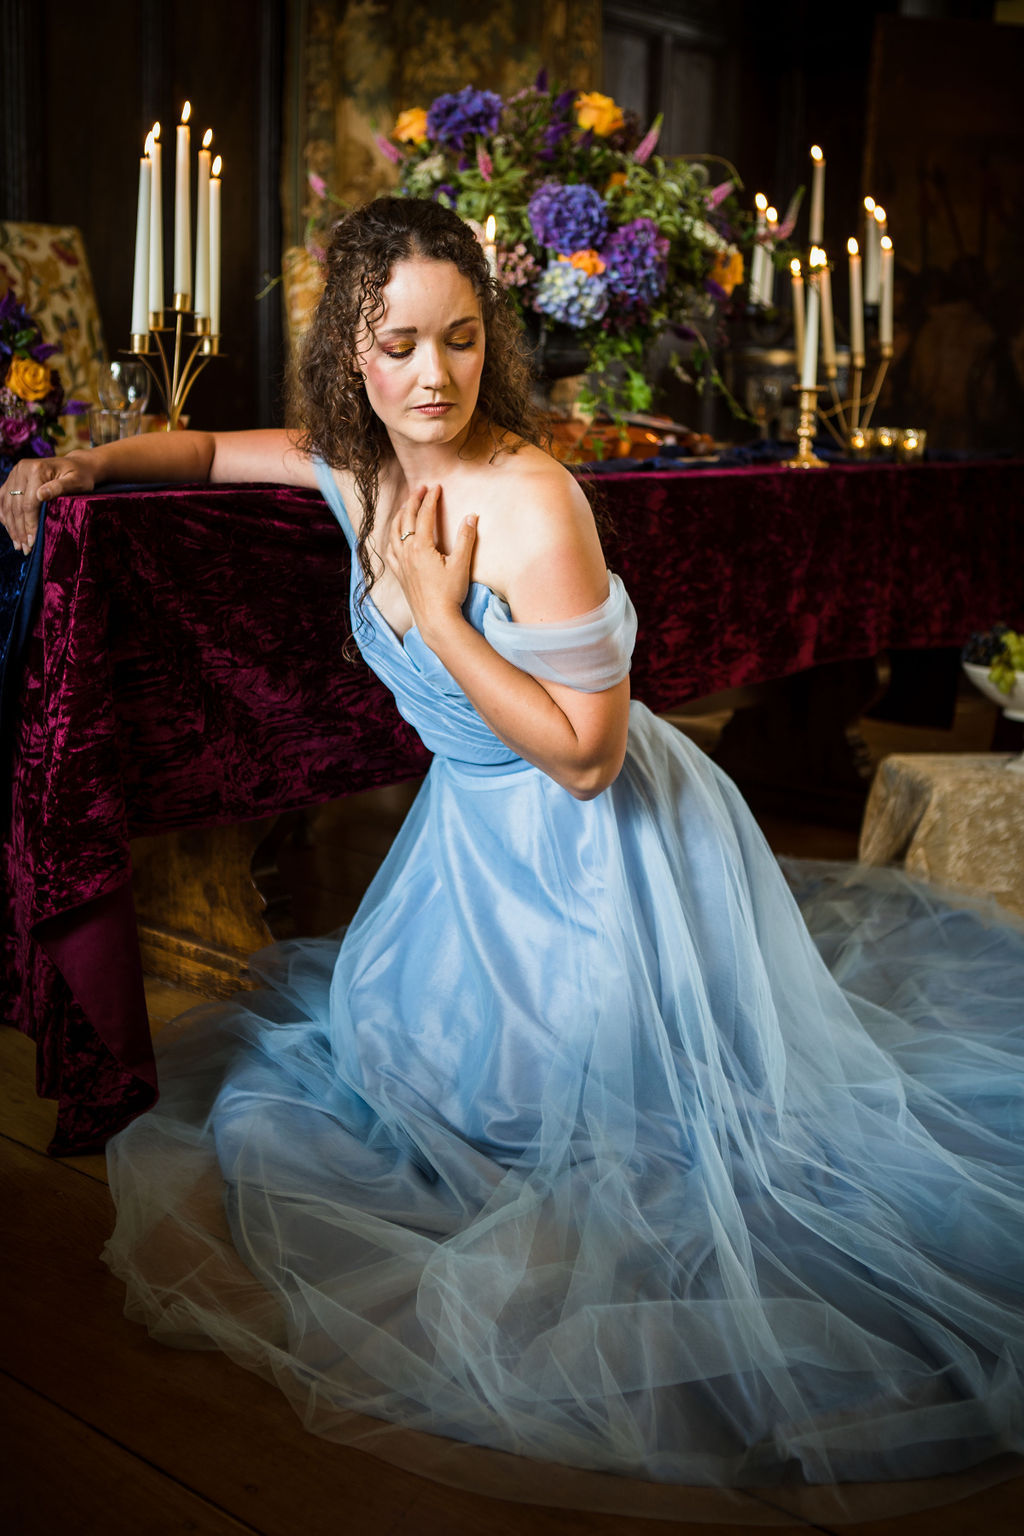 brown haired bride with loose curls wearing a 2 piece blue wedding dress in front of a wedding breakfast table dressed in velvet table cloths in burgandy and navy, golden tableware and vibrant florals